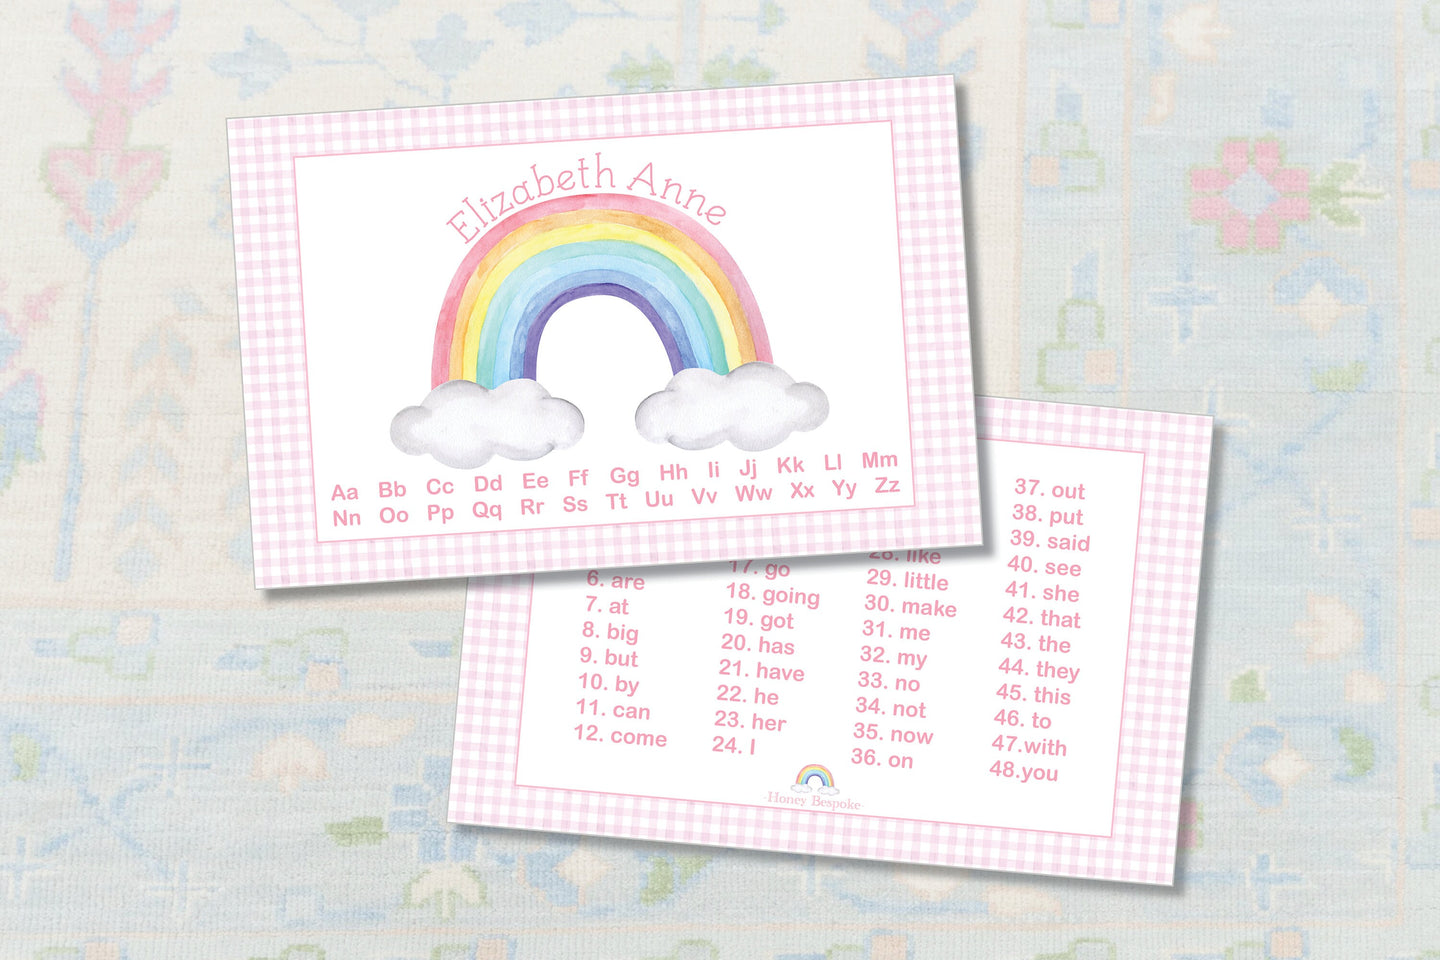 Personalized Summertime Placemat / Watercolor Rainbow Placemat / Sight Words Placemat / Educational Placemat / Laminated Placemat